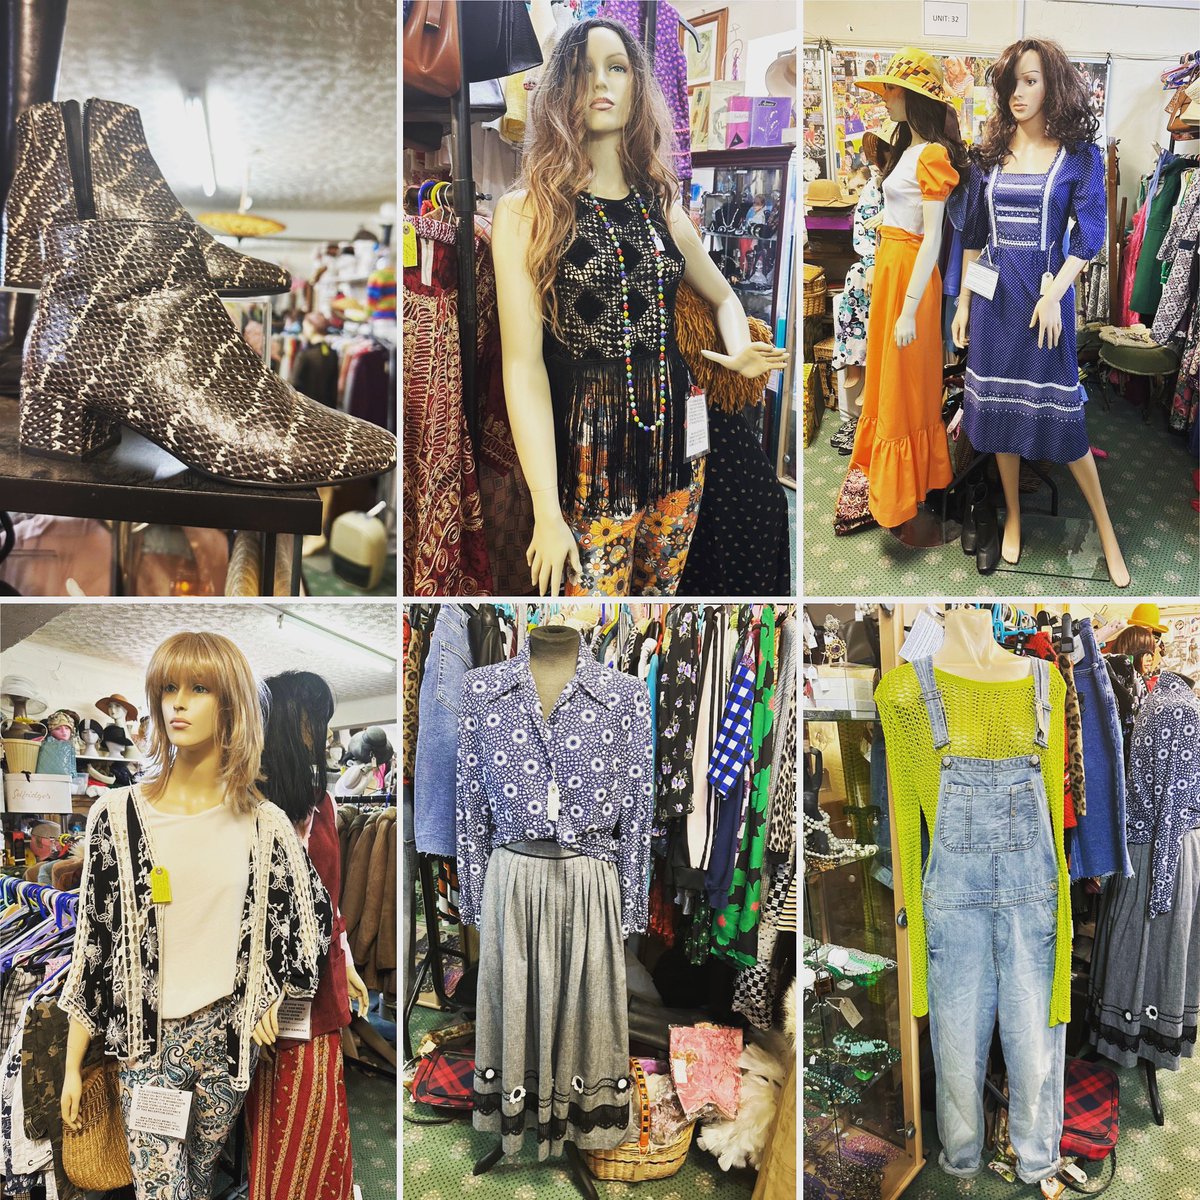 Festival inspired from unit 32 
Open until 5pm 
#glastonbury #festival #festivalfashion #musicfestival #festivalclothes #vintagefestivalclothes #vintagefestival #astraantiquescentre #hemswell #lincolnshire